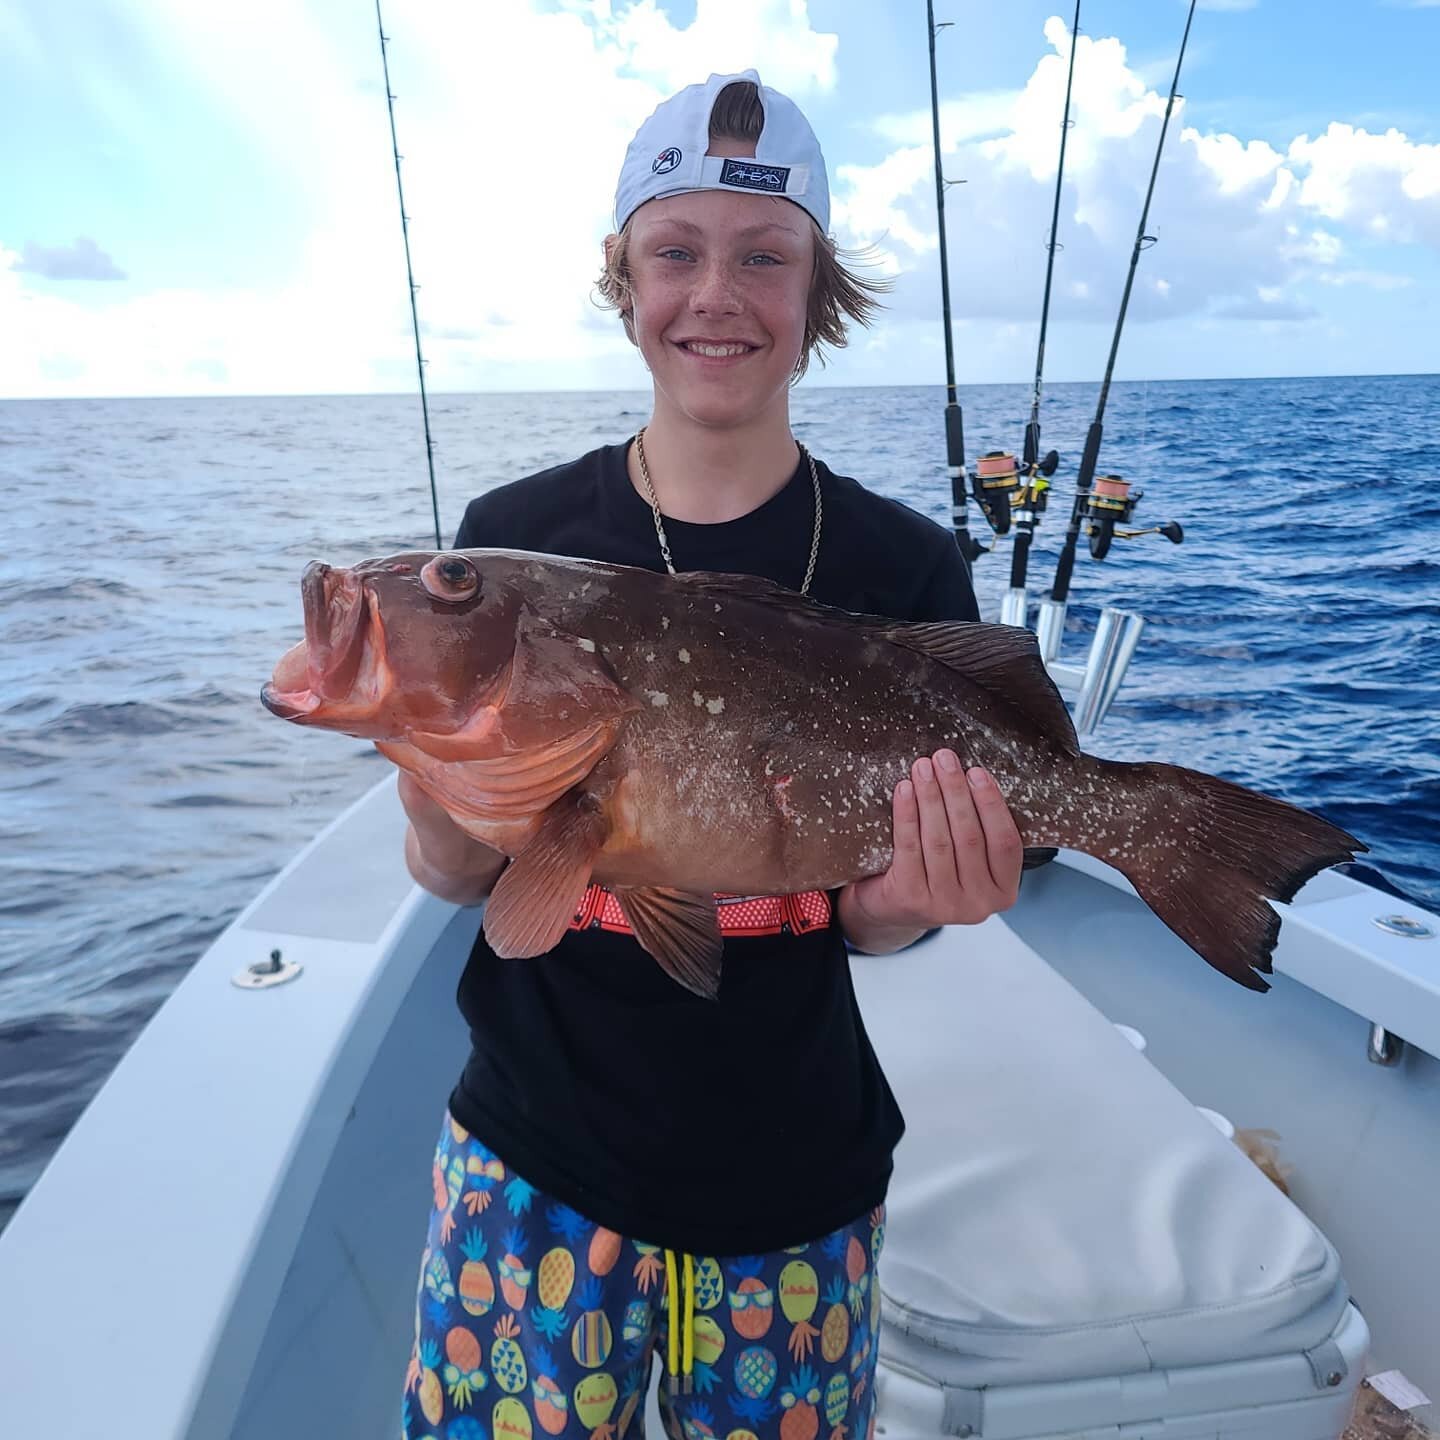 Had a blast with the Cordes family on the boat for a half day. Despite the #heavycurrent the boys worked hard and caught a #varietypack of fish for dinner 
&bull;
&bull;
#GUARANTEEDFISH 
#Fantasticcharters #HopAlong #rambo27 #mutton #grouper #yellowj